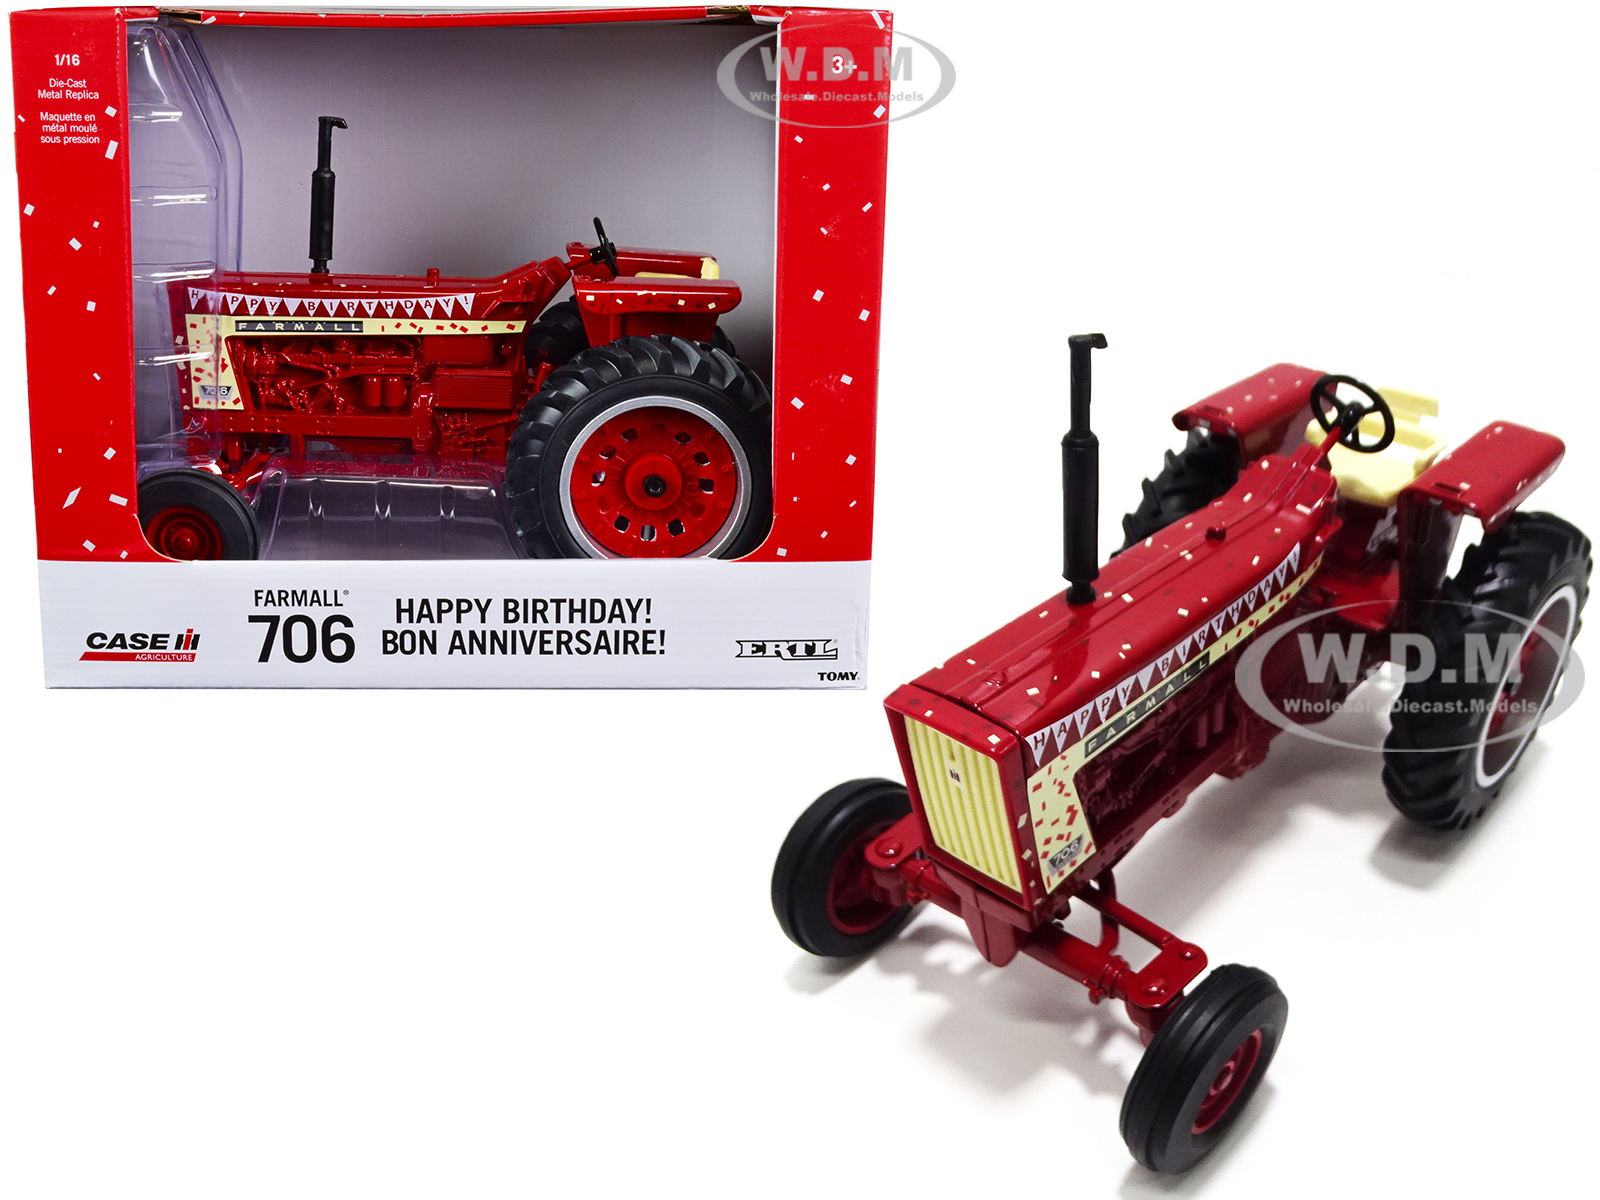 Farmall 706 Wide Front Tractor Red "Happy Birthday" Edition "Case IH Agriculture" Series 1/16 Diecast Model by ERTL TOMY